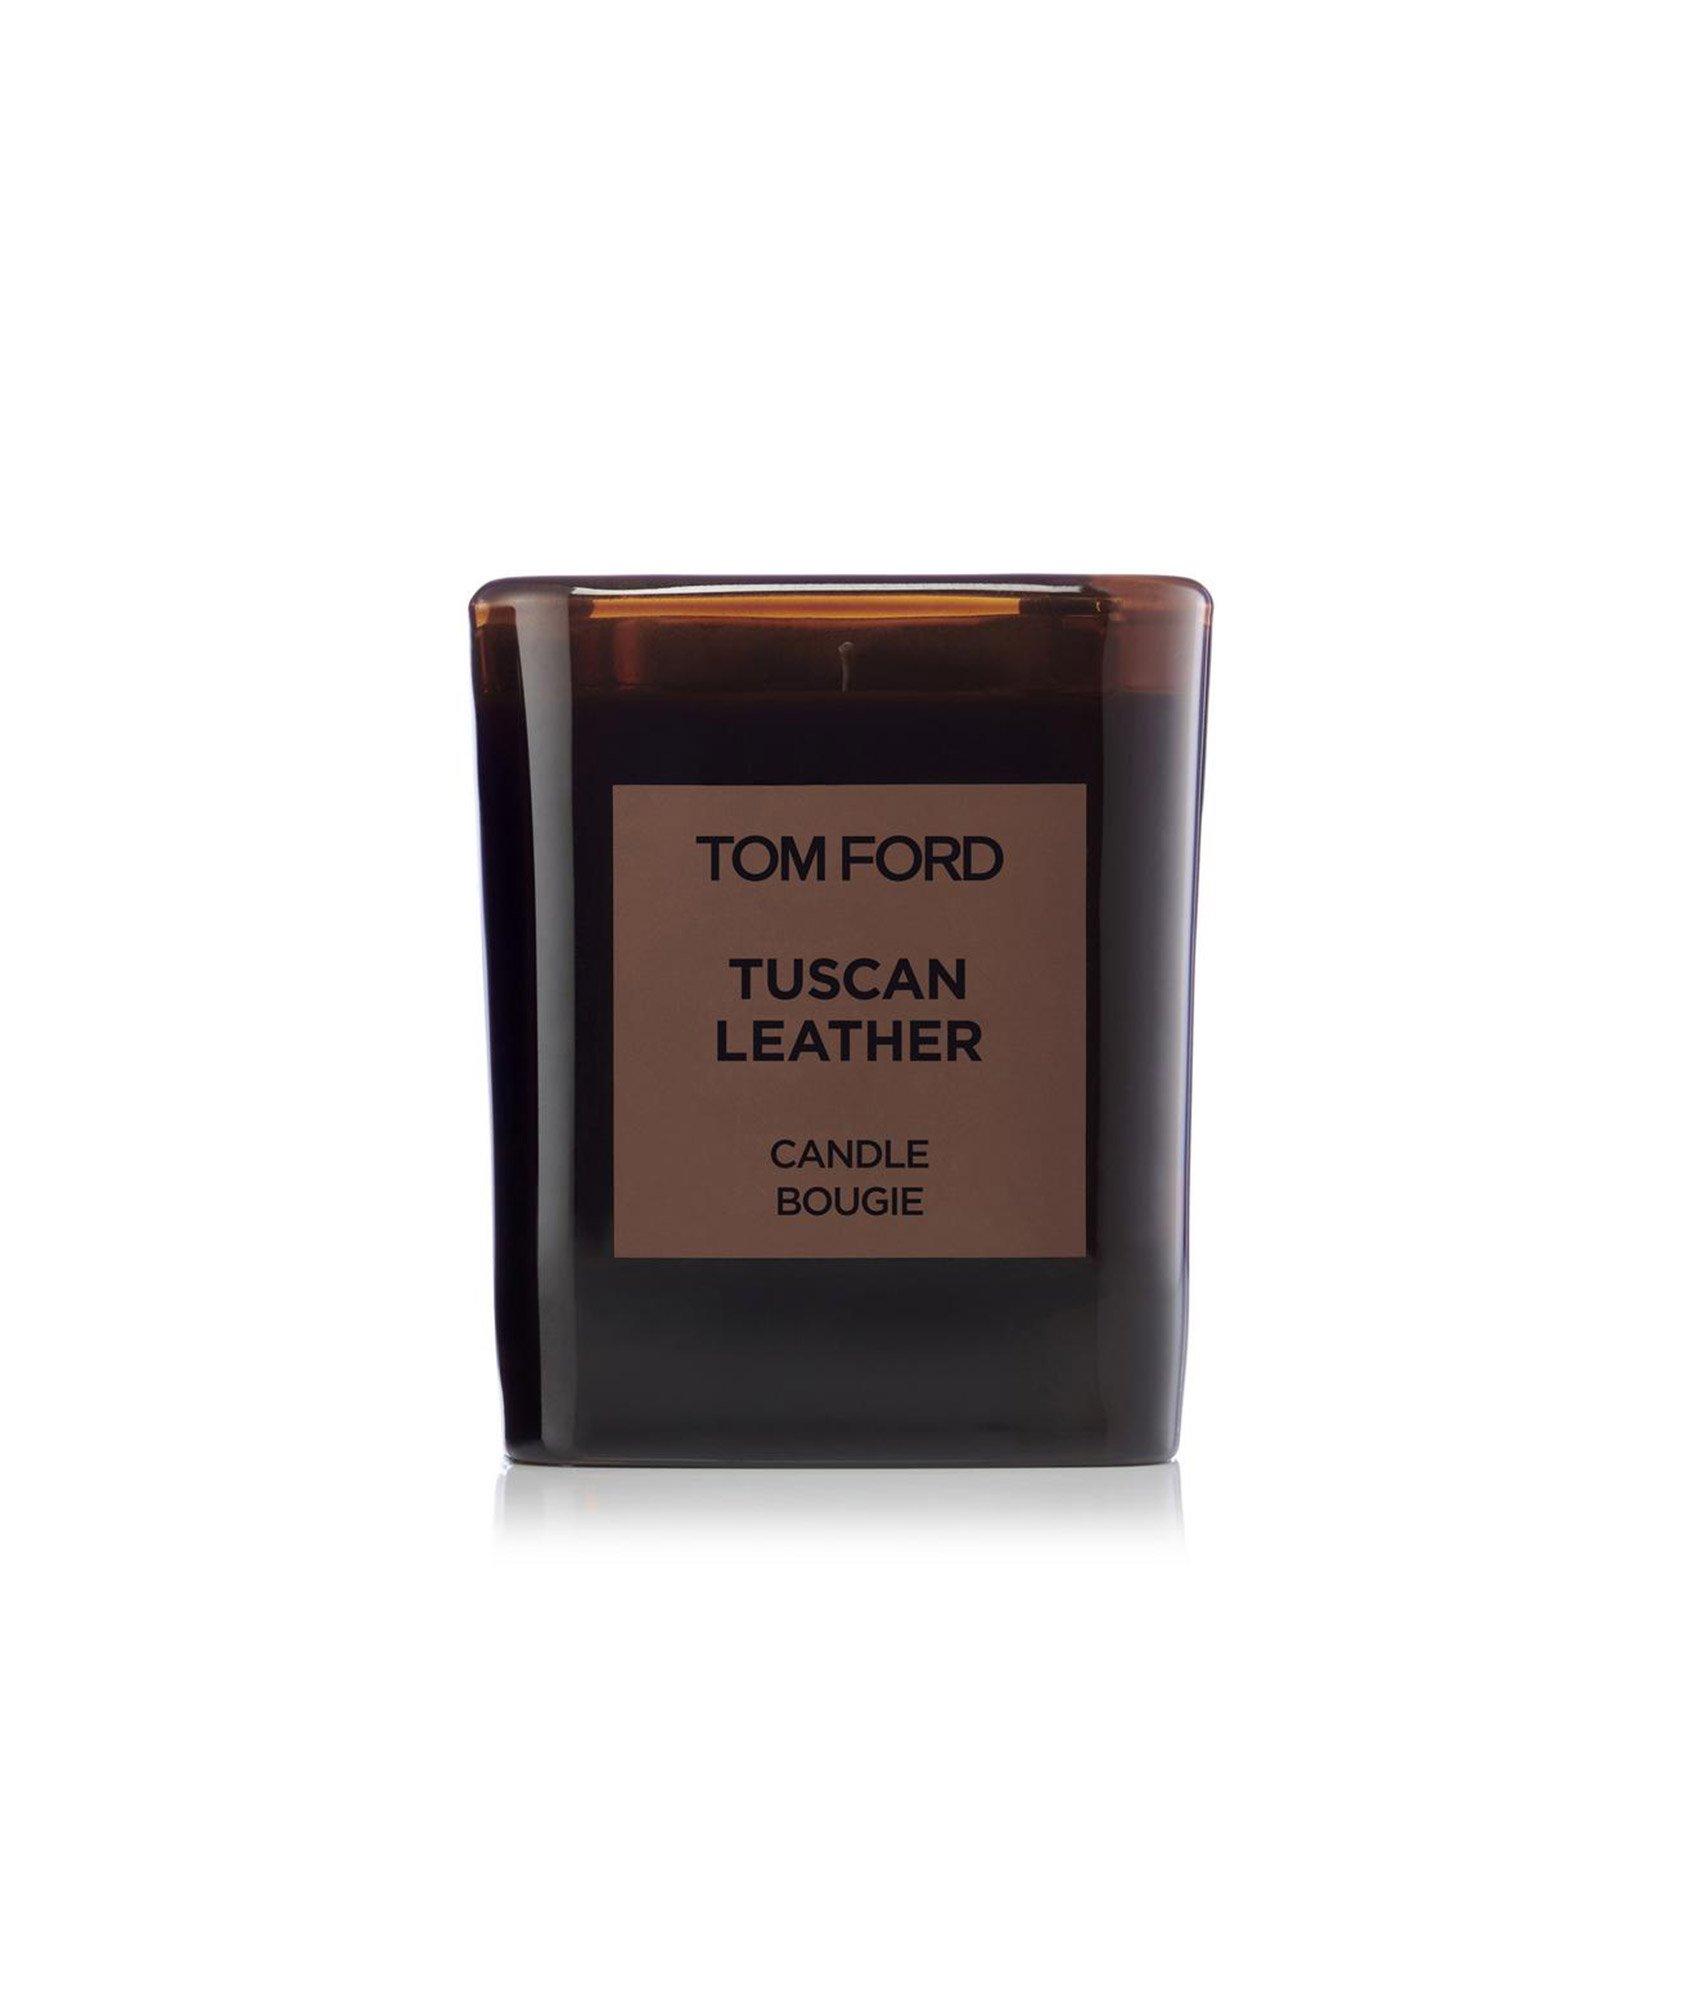 Tuscan Leather Candle image 0